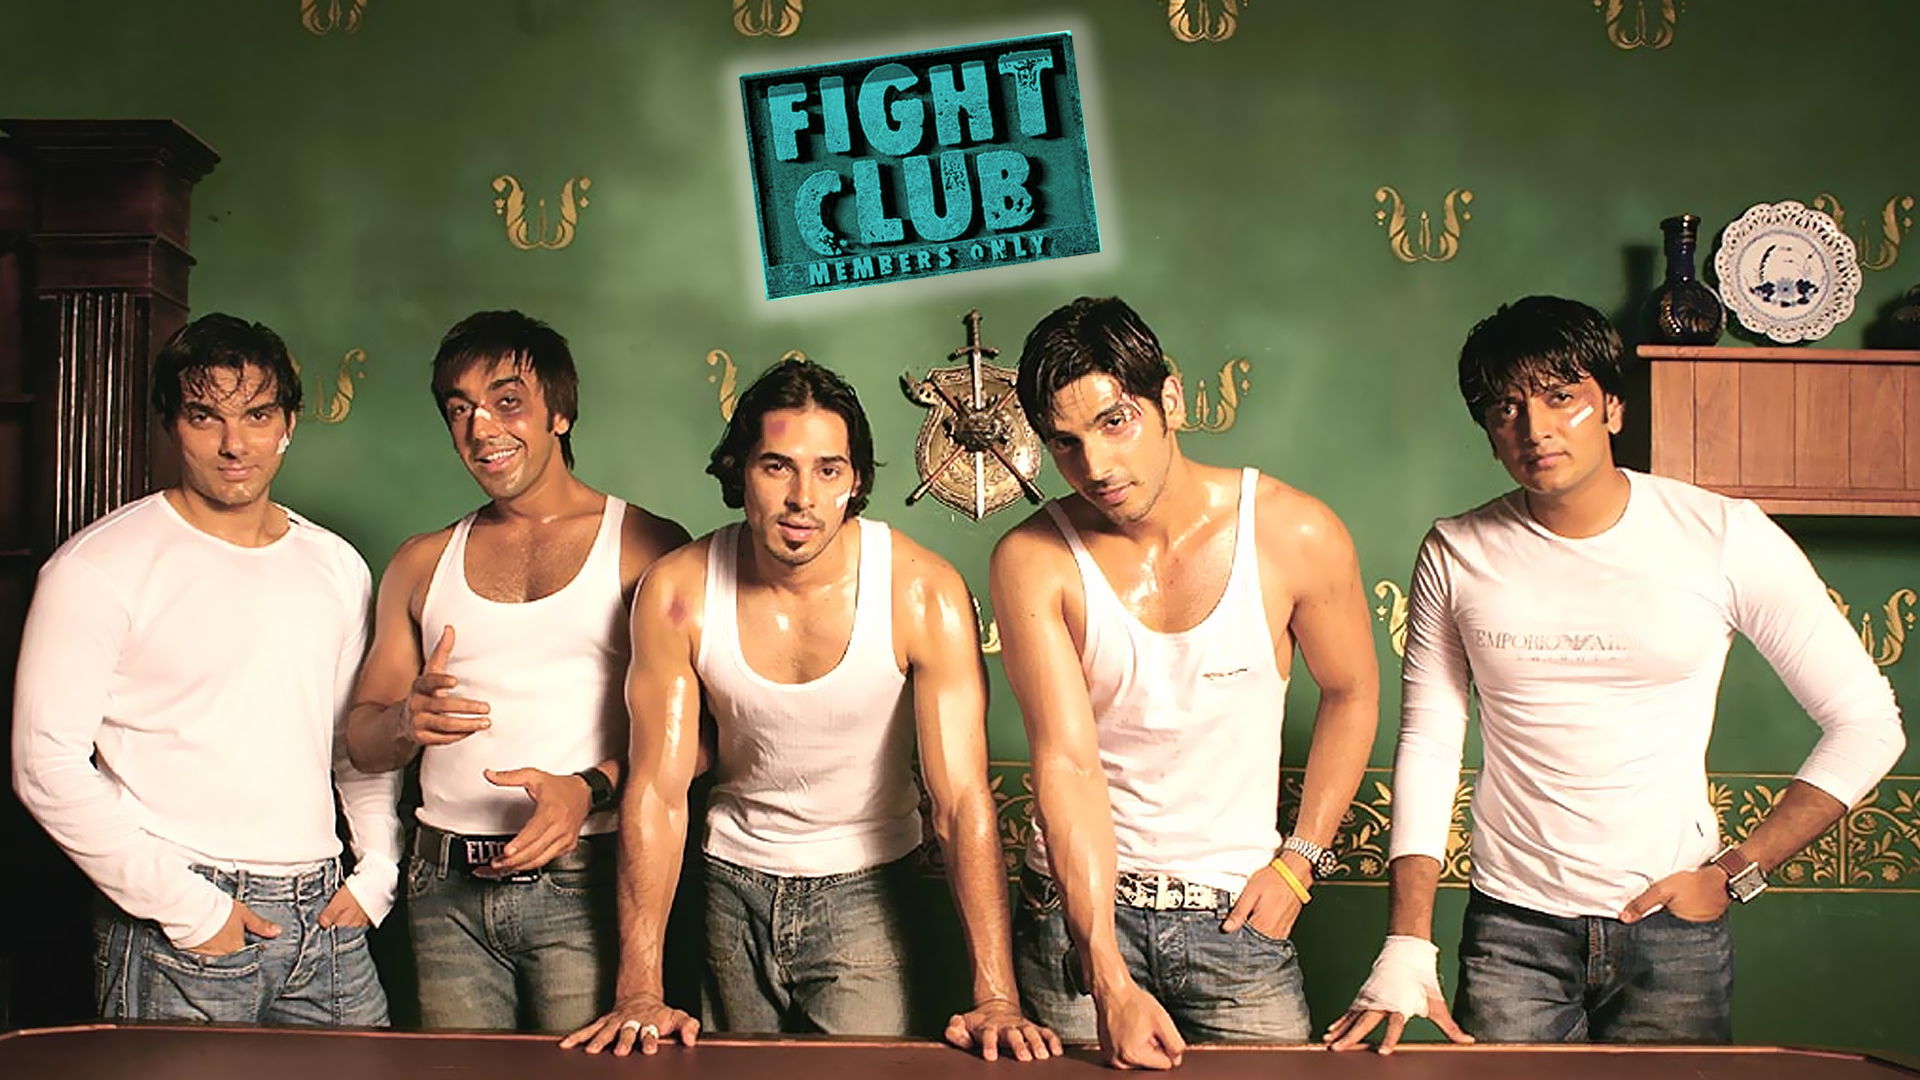 clay fincher recommends fight club movie hindi pic